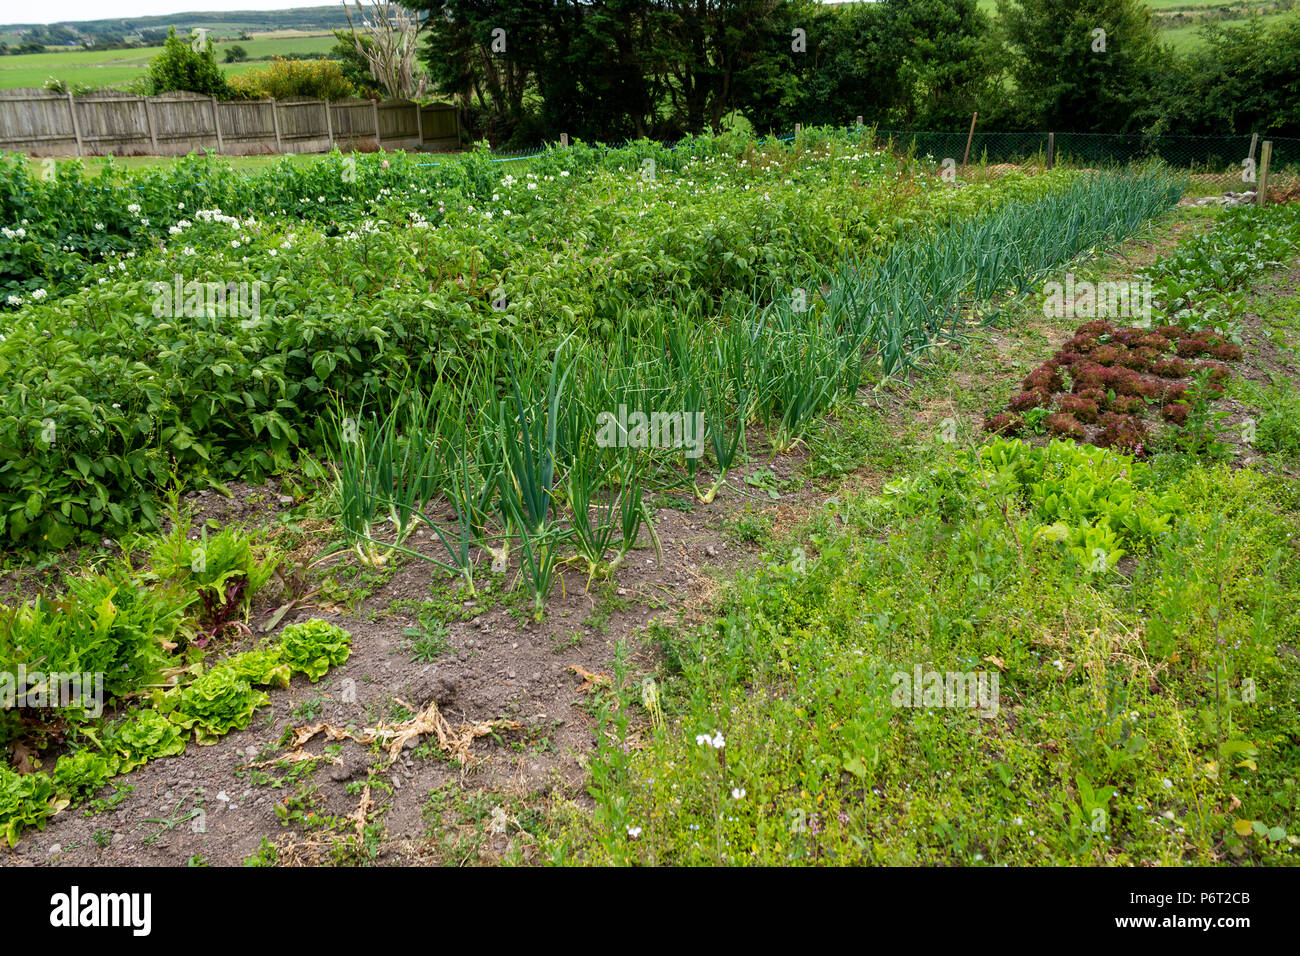 garden vegetable plot growing onions, potatoes, salad crops, peas, and lettuce. Stock Photo